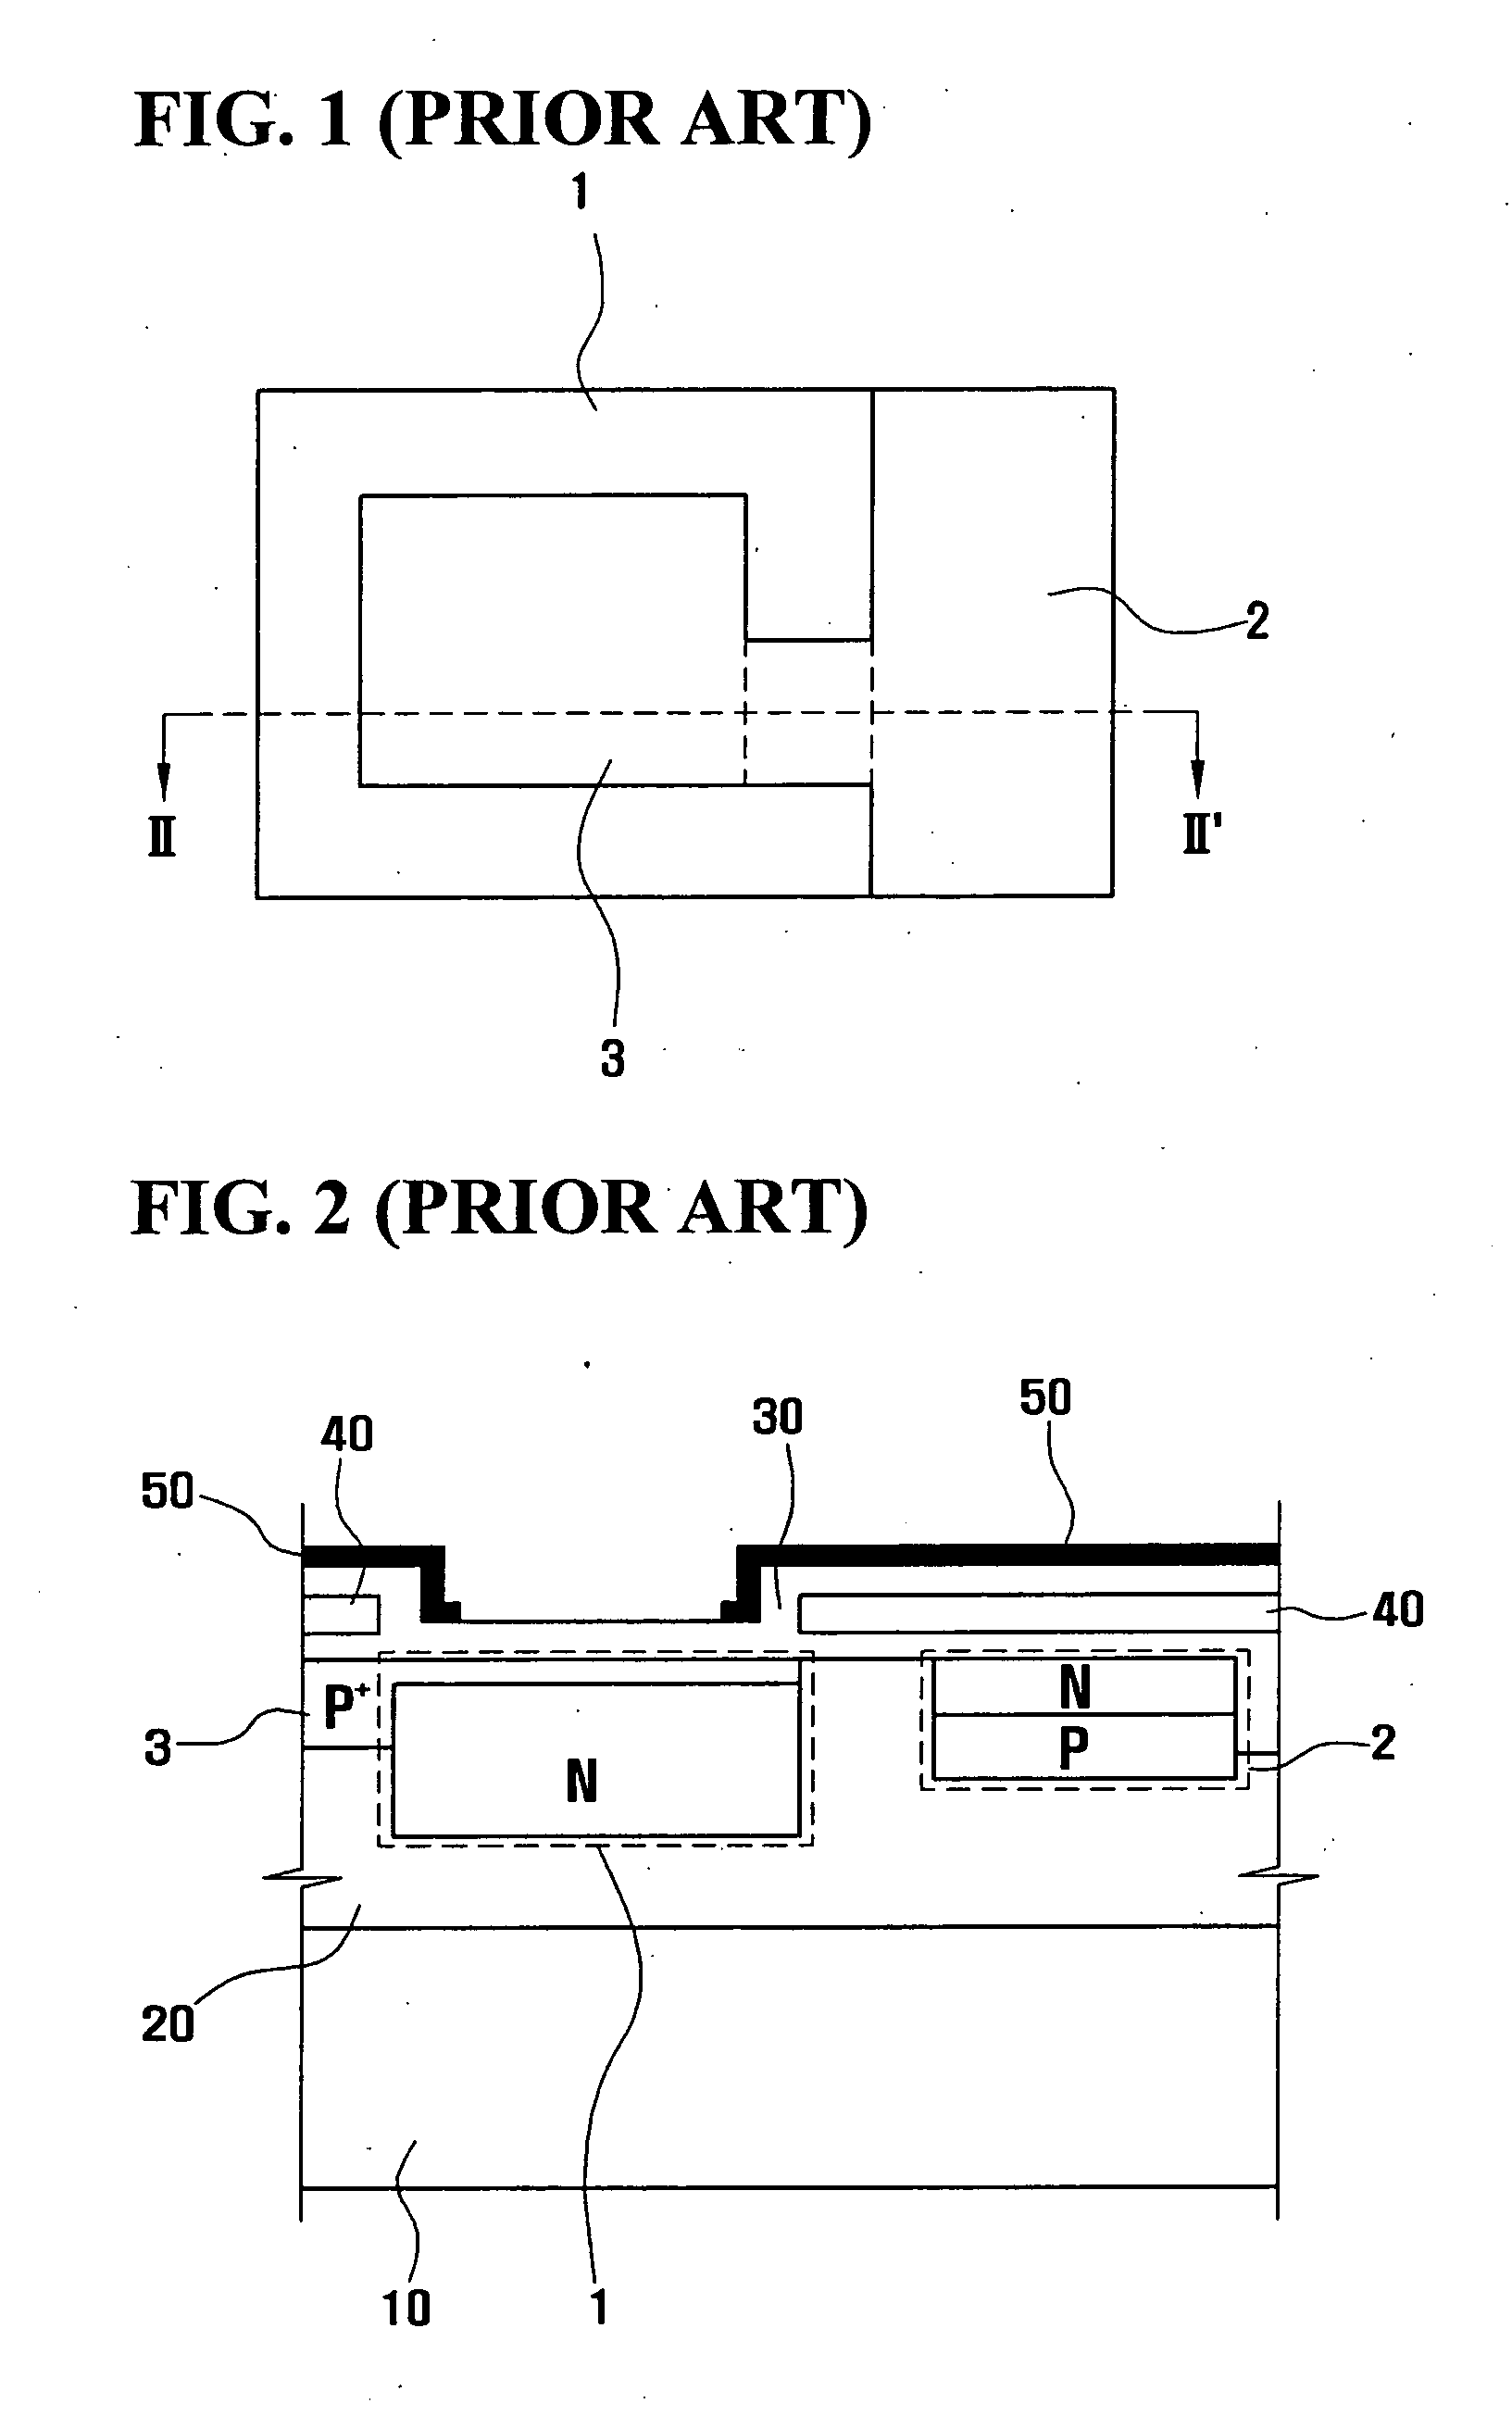 Solid-state imaging apparatus having multiple anti-reflective layers and method for fabricating the multiple anti-reflective layers